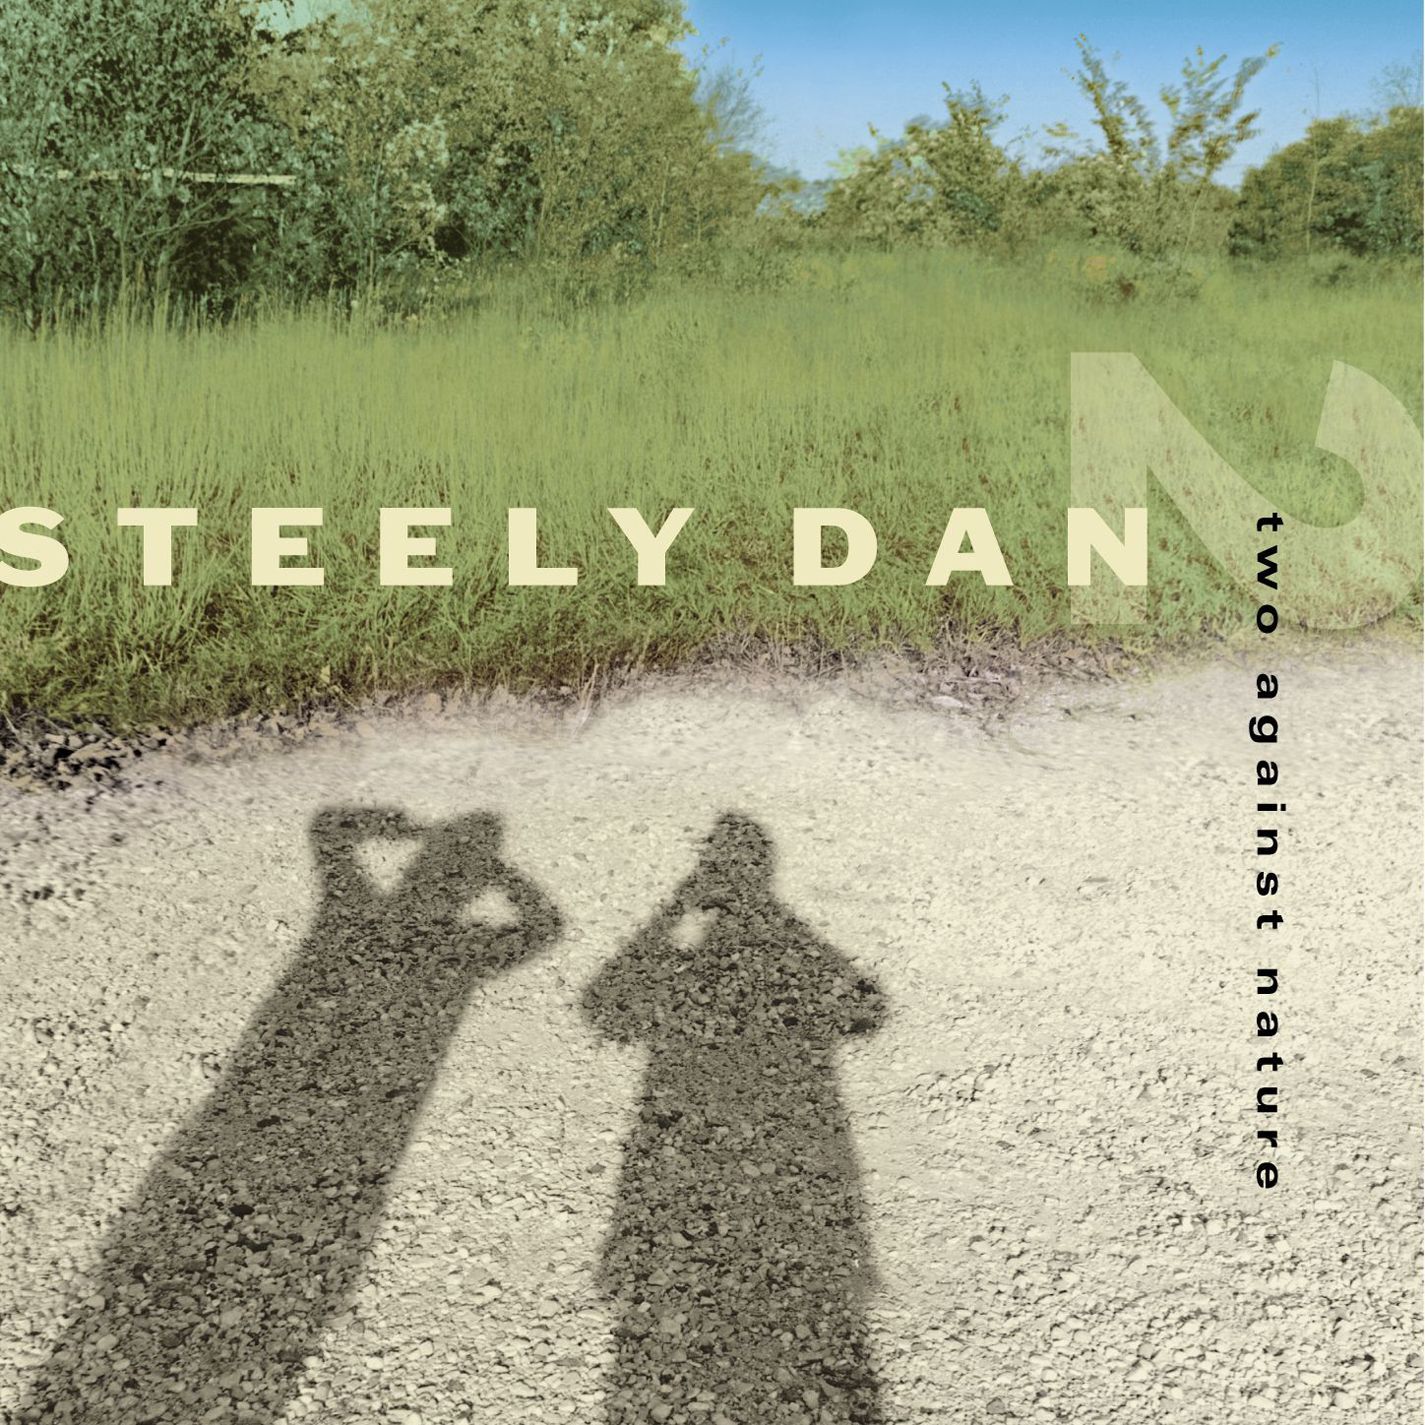 Steely Dan - Two Against Nature (Edition Studio Masters) (2000/2012) [FLAC 24bit/96kHz]